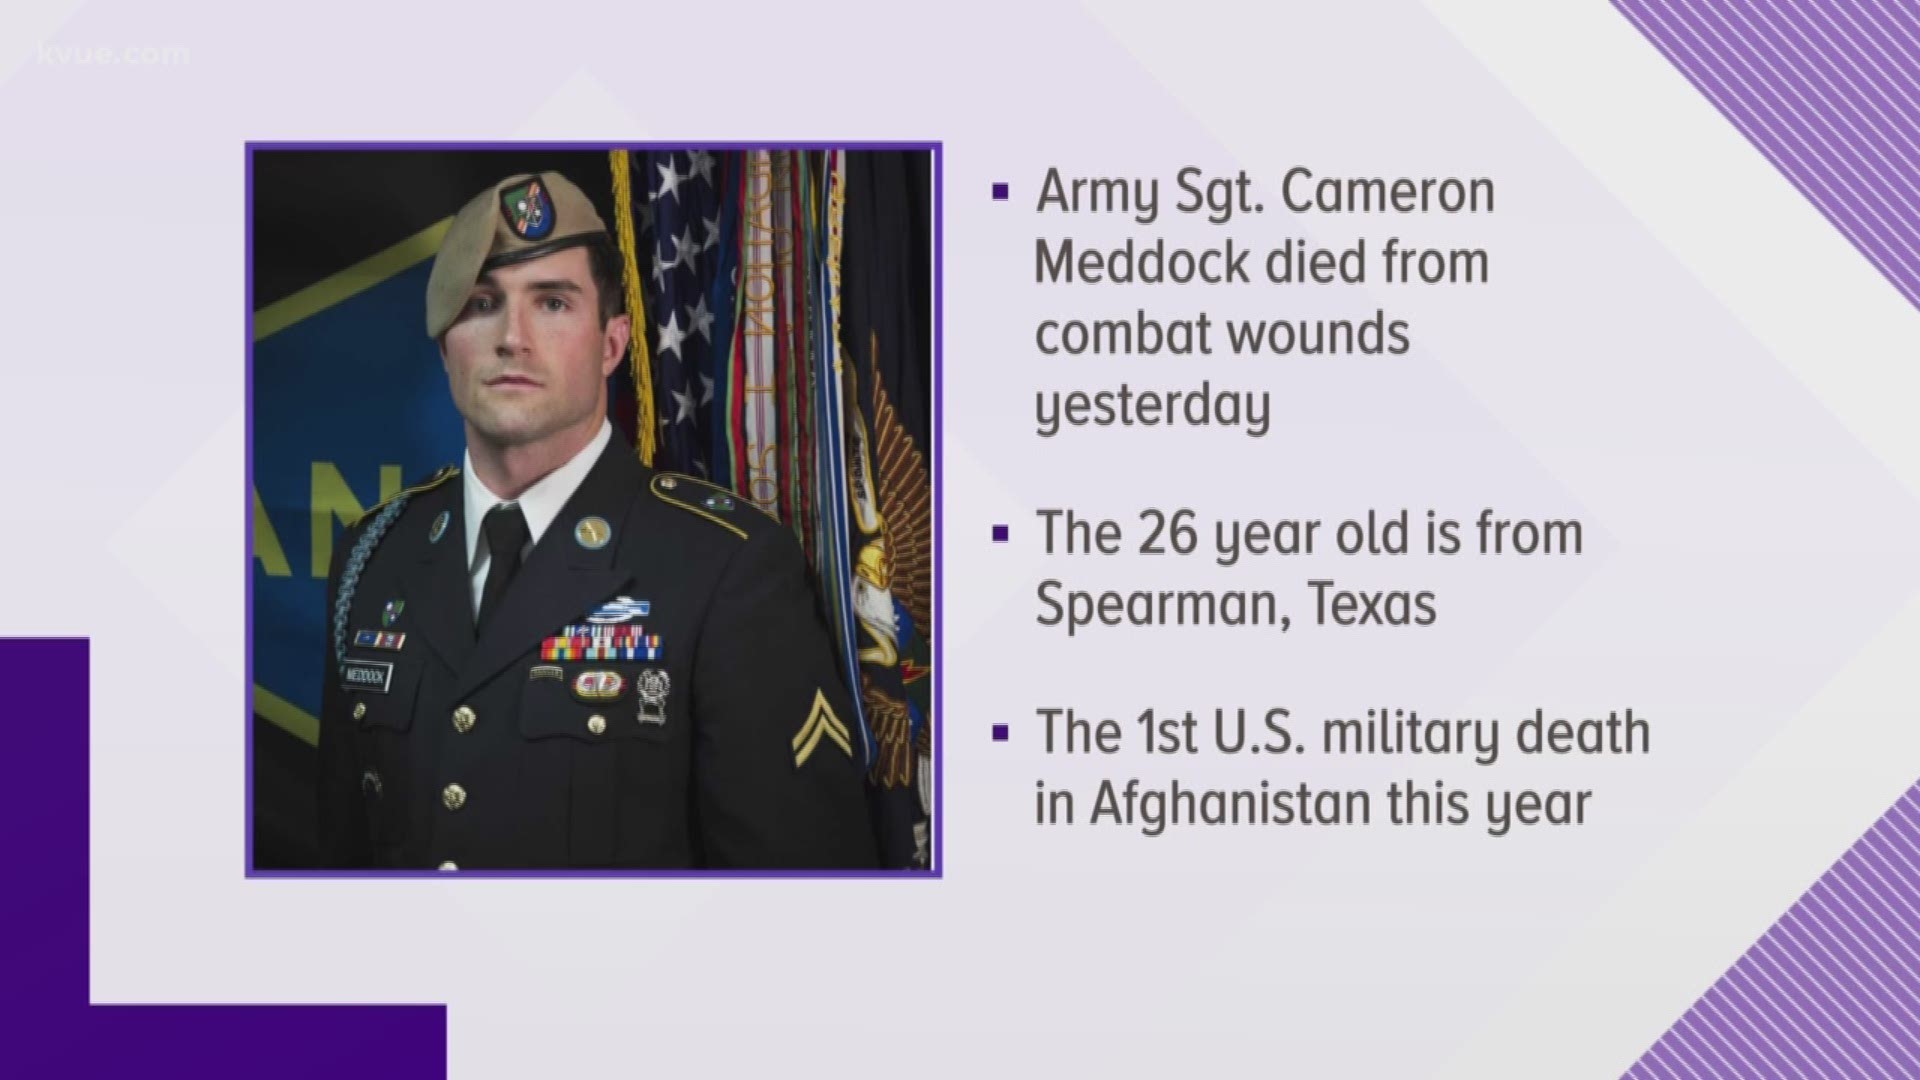 Sergeant Cameron Meddock was one of about 14,000 troops stationed in Afghanistan.